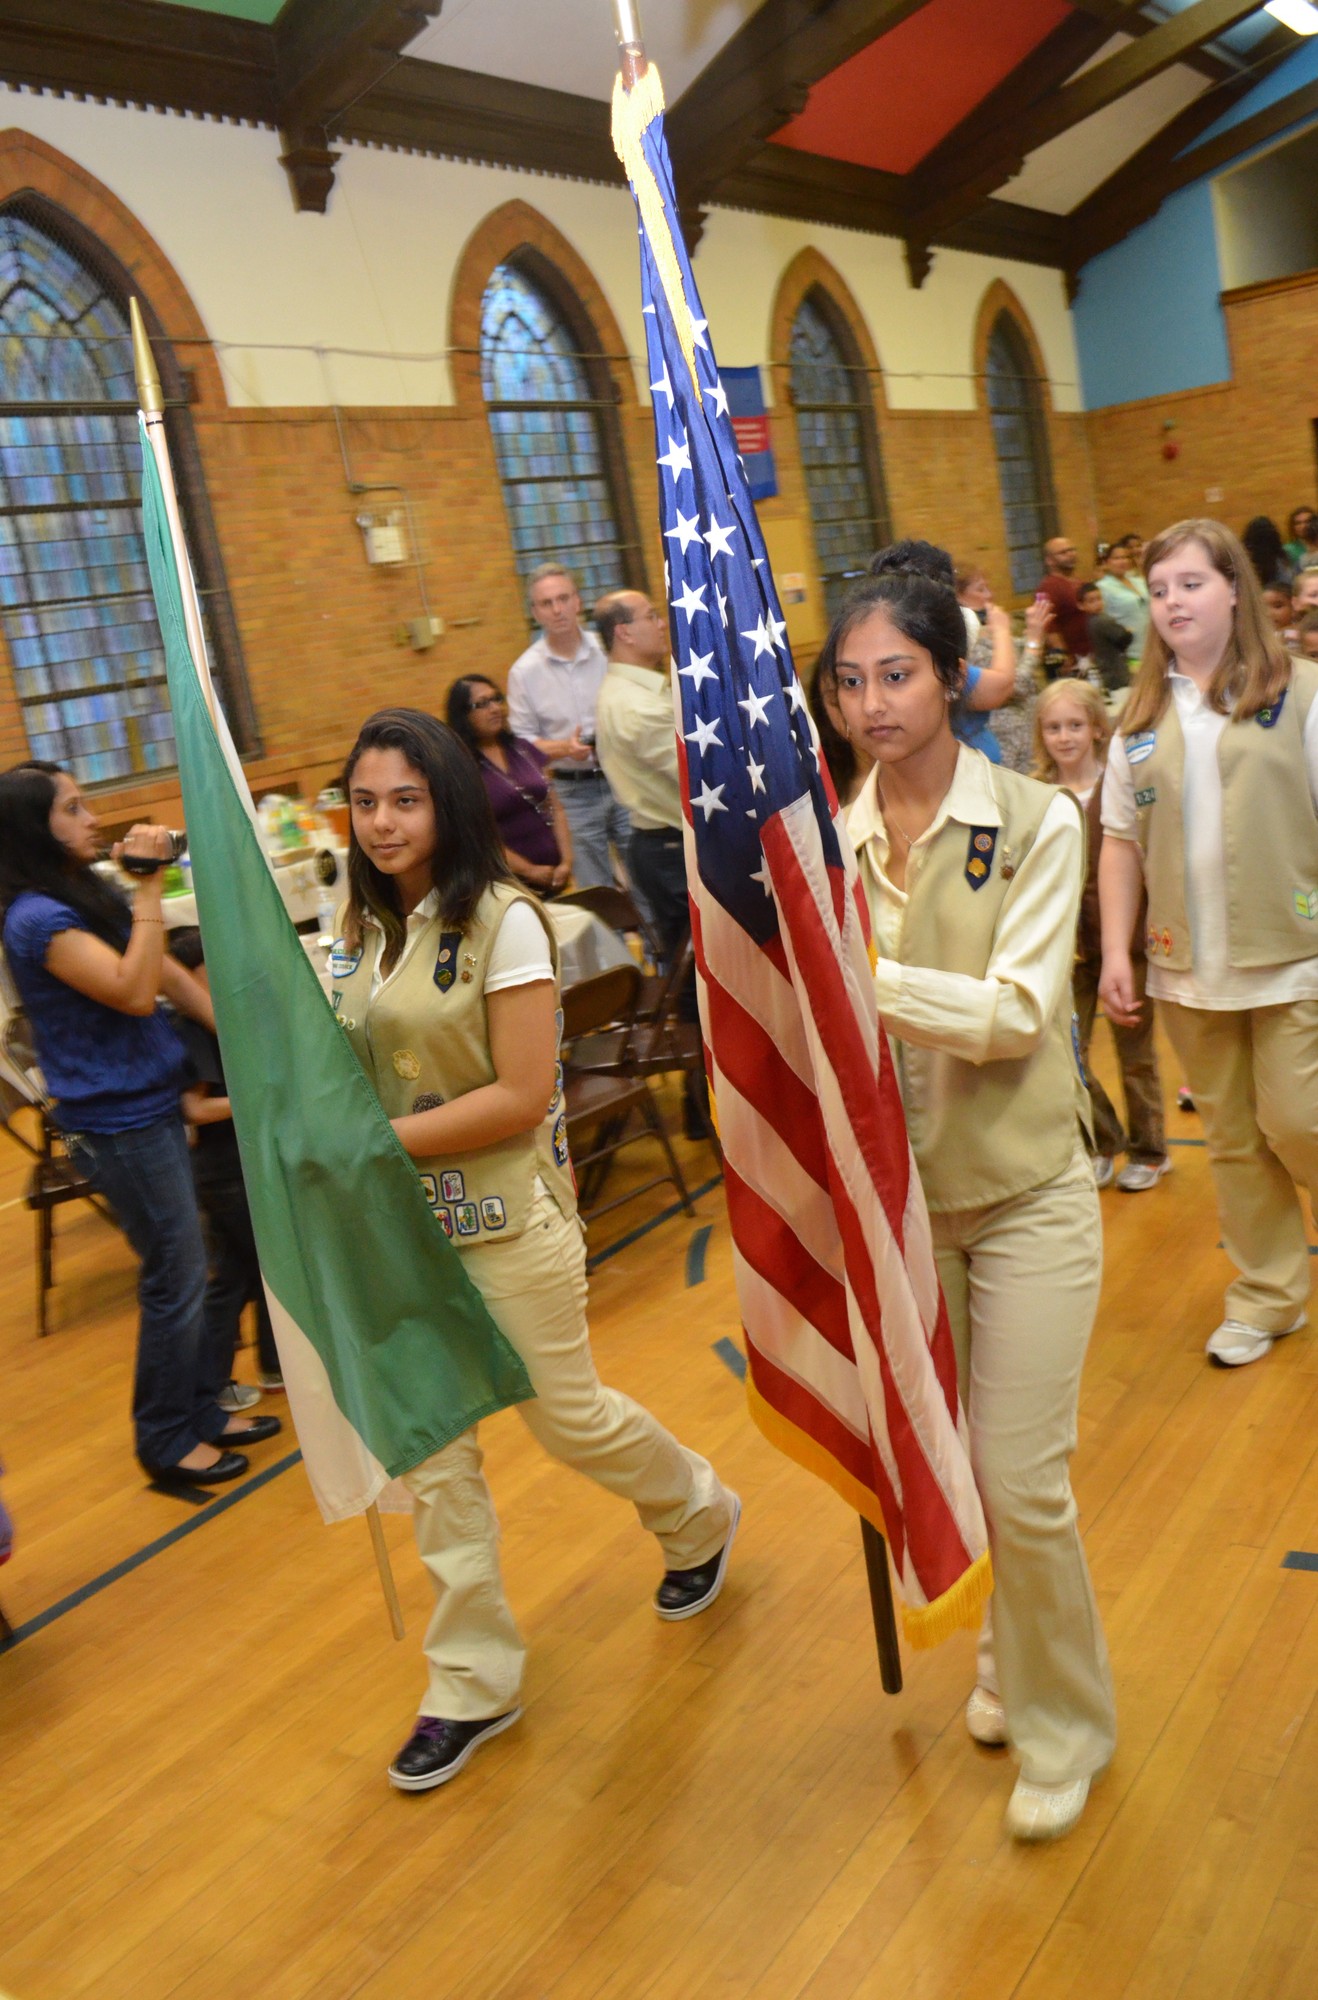 A Girl Scout Color Guard opened the ceremony at Holy Name of Mary School.